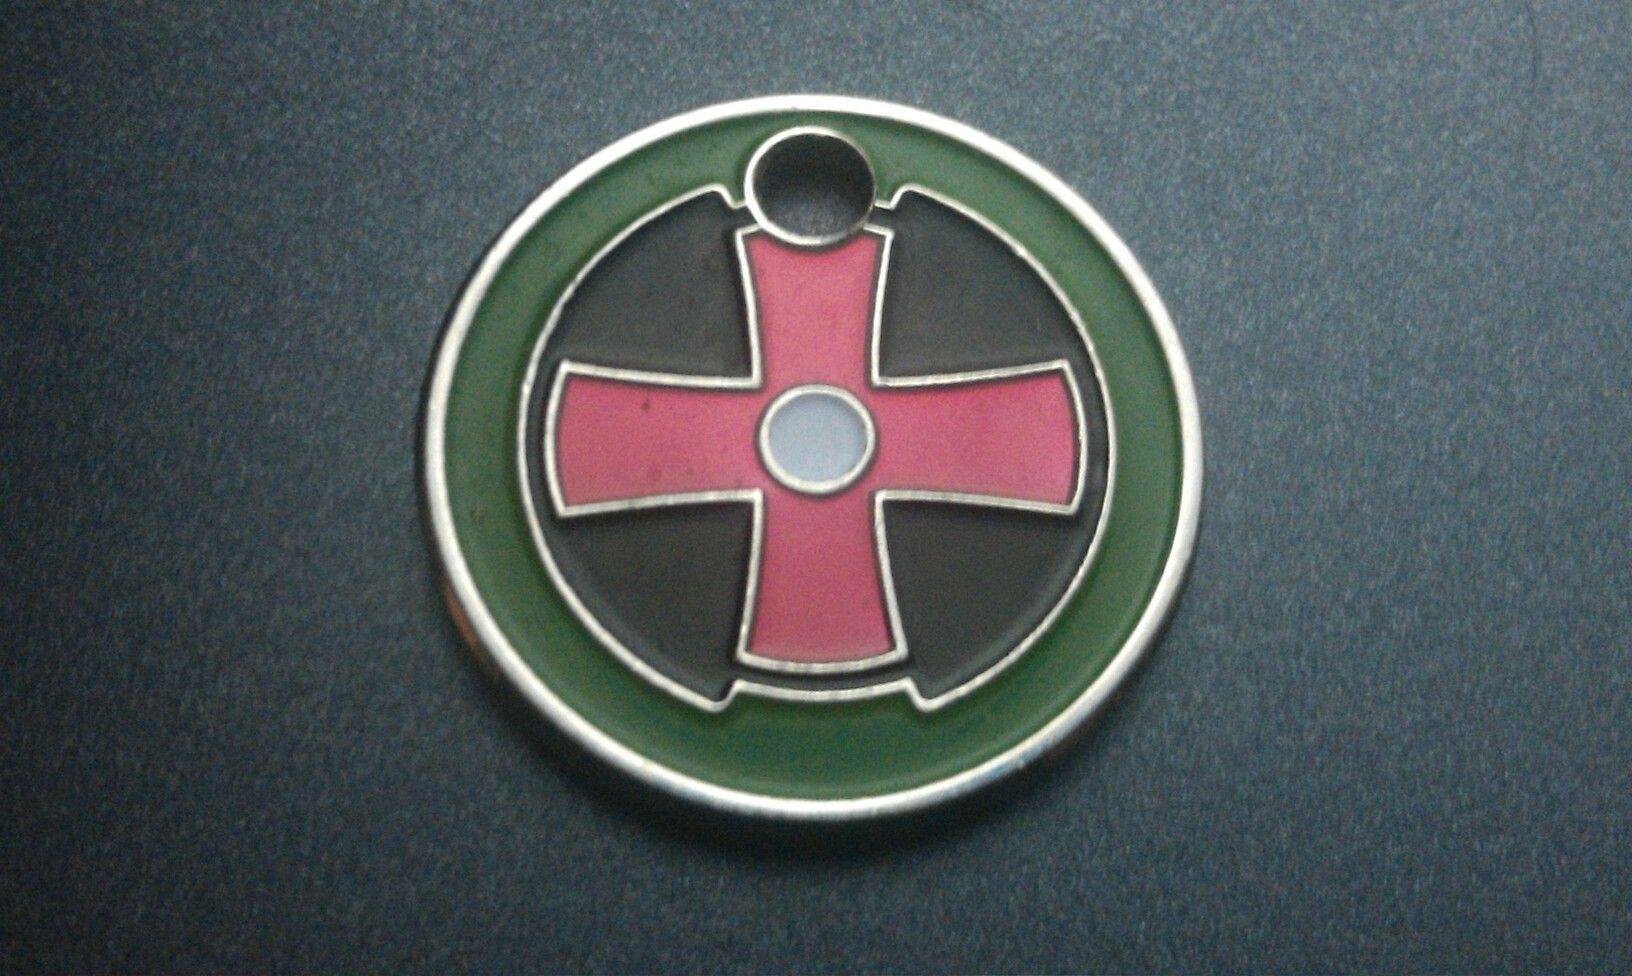 Red Circle with White N Logo - My Circle Pendant based on my favorite series by Ted Dekker. Black ...